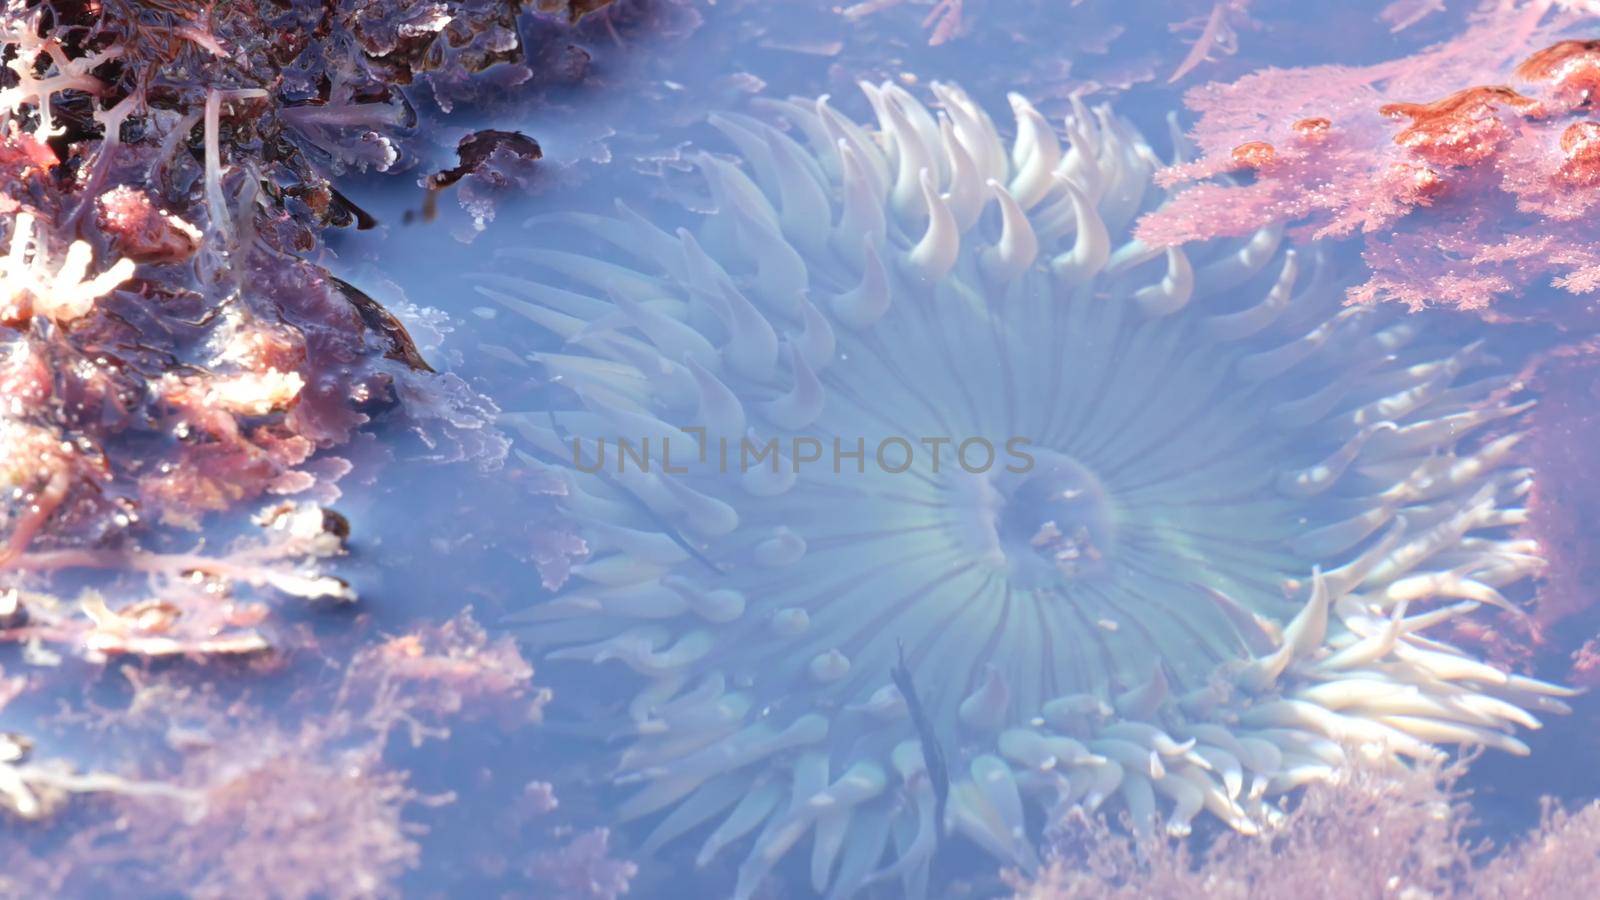 Sea anemone tentacles in tide pool water, anemones in tidepool. Actiniaria polyp by DogoraSun